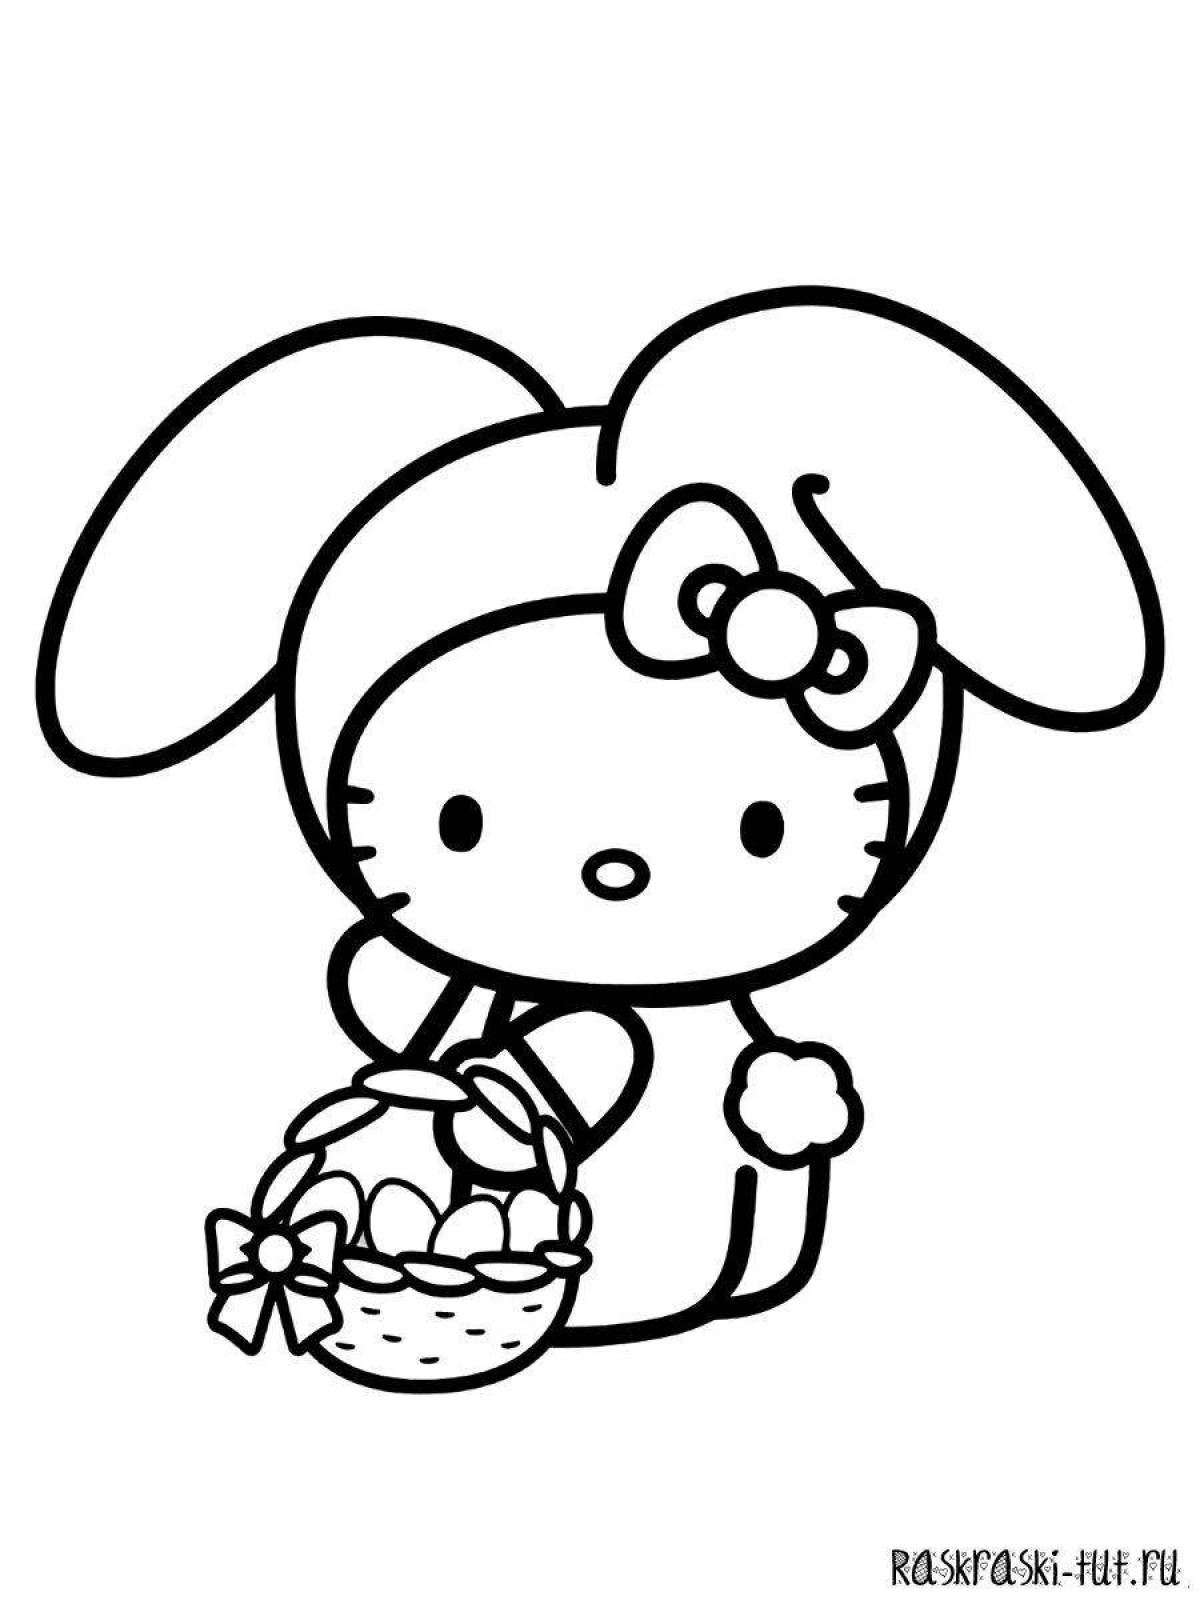 Colored explosive chickens and hello kitty coloring page